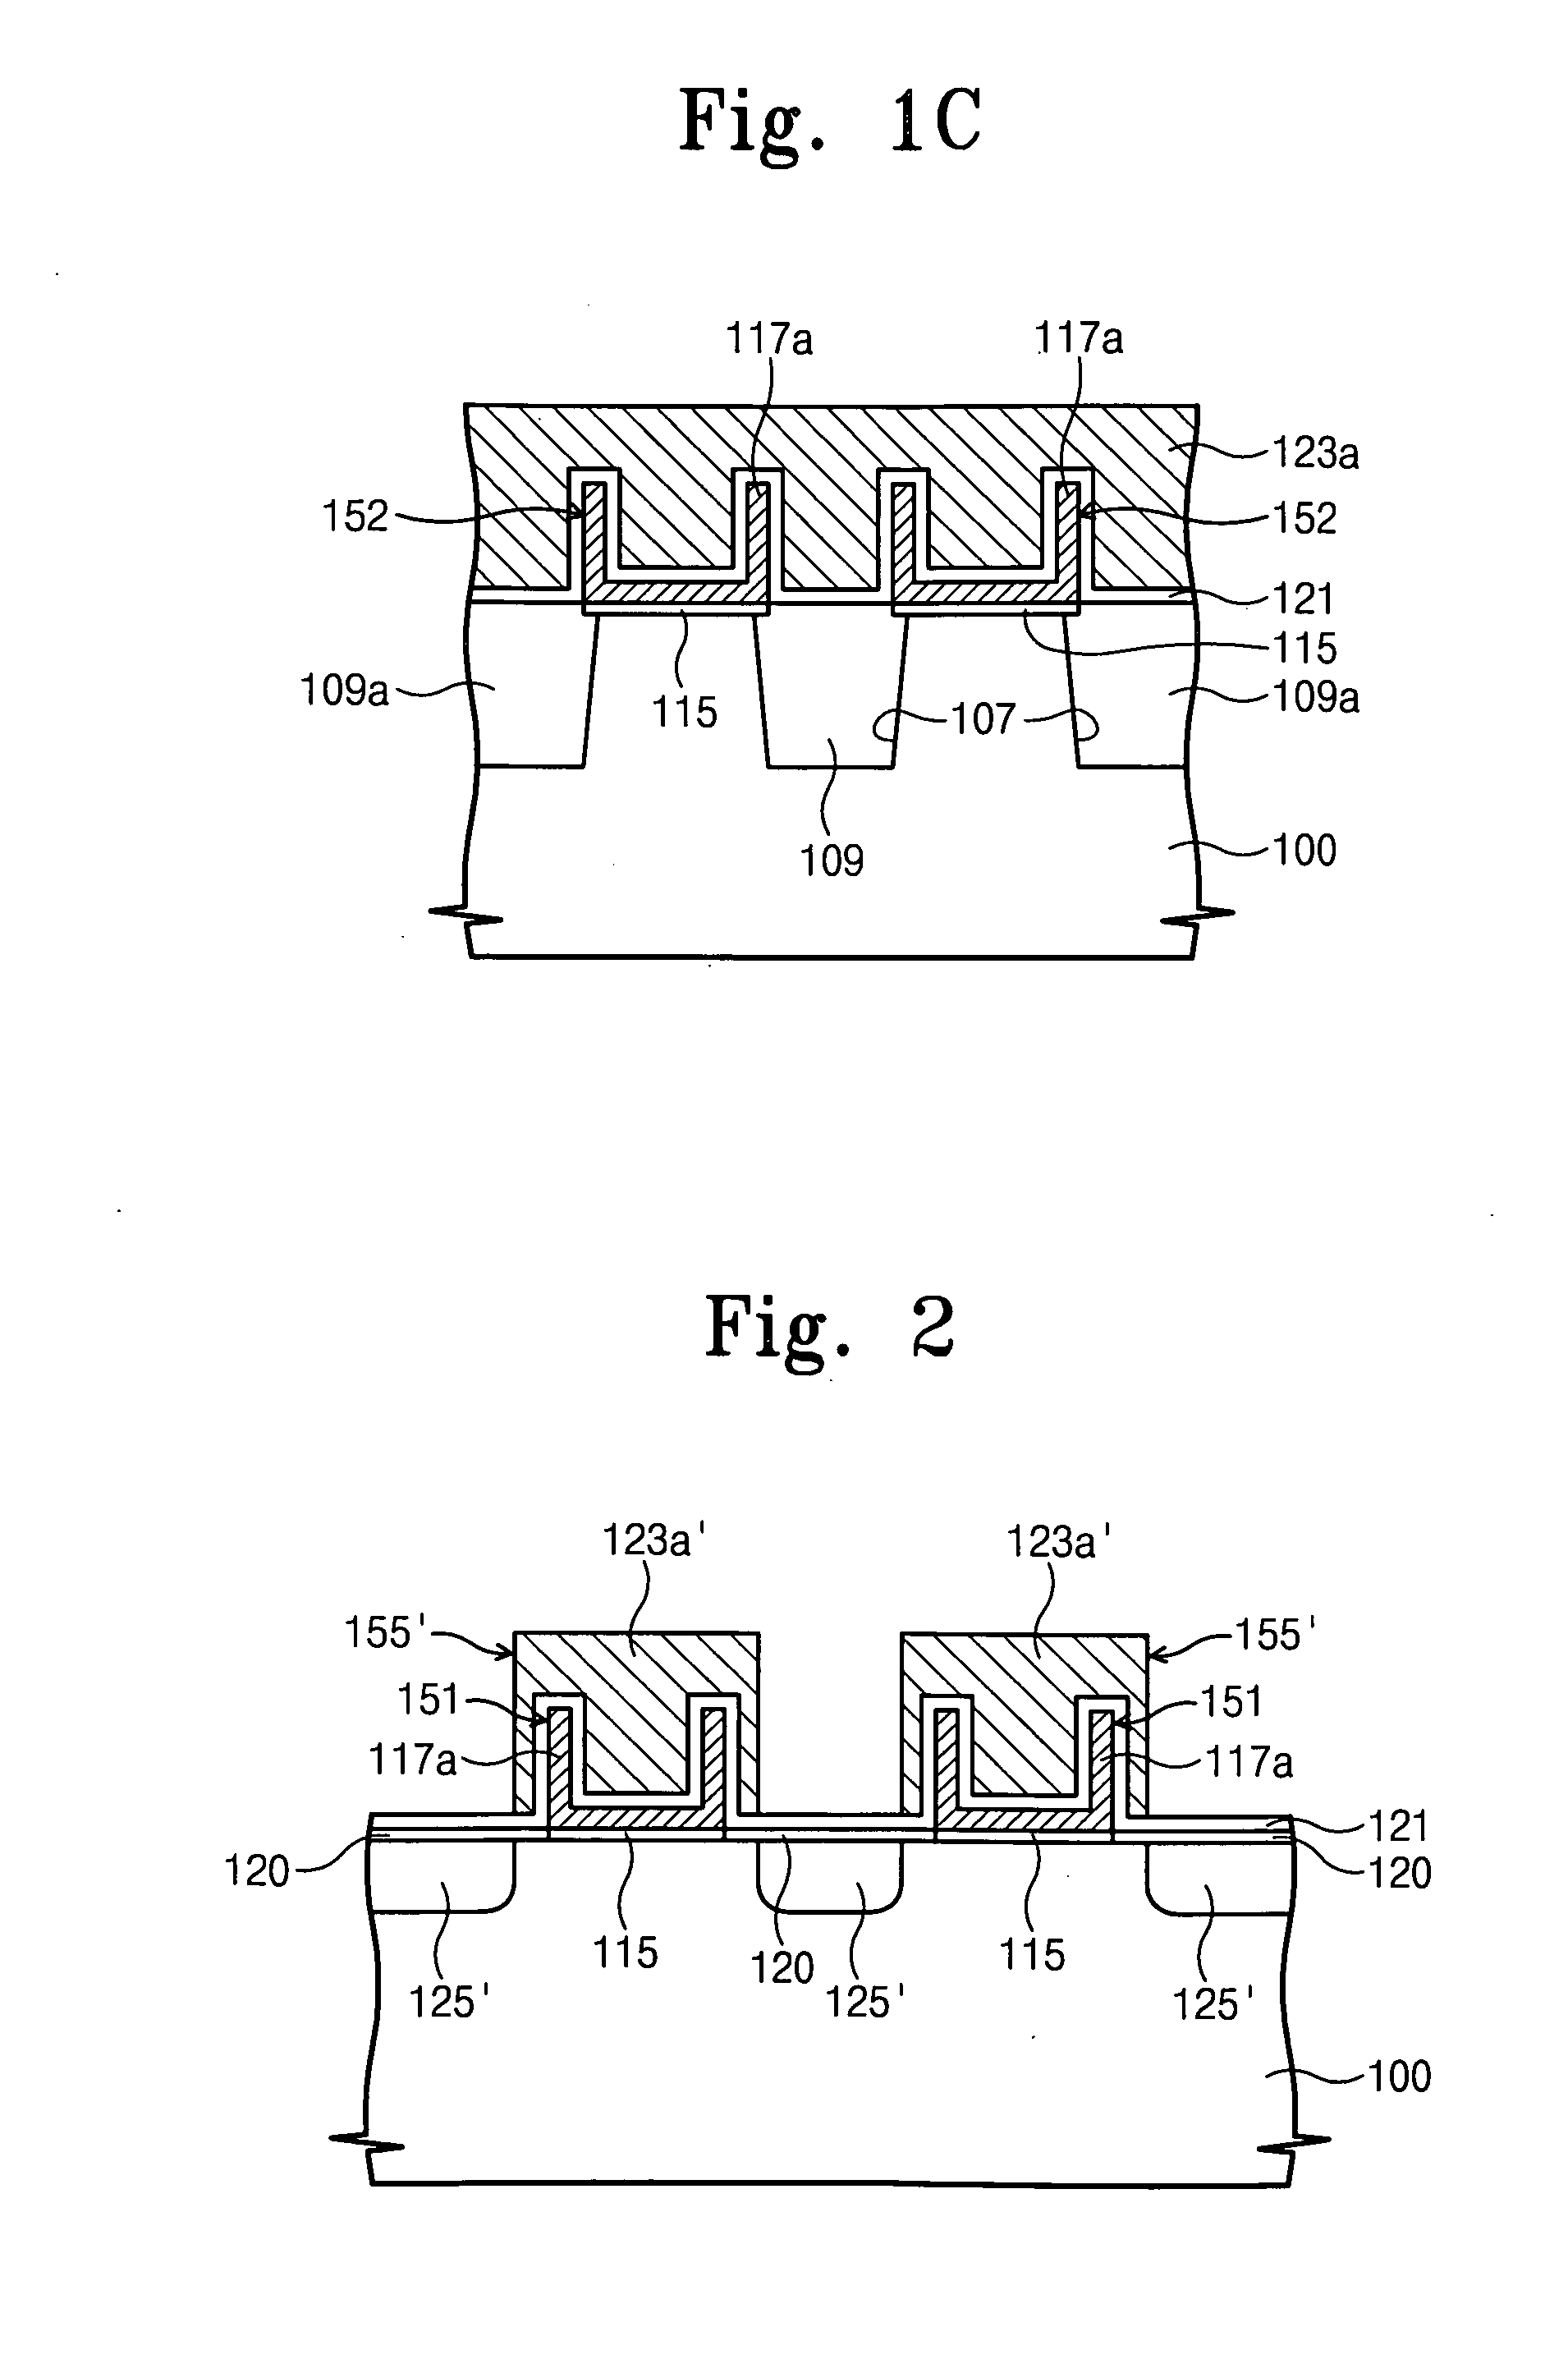 Non-volatile memory device having floating gate and methods forming the same